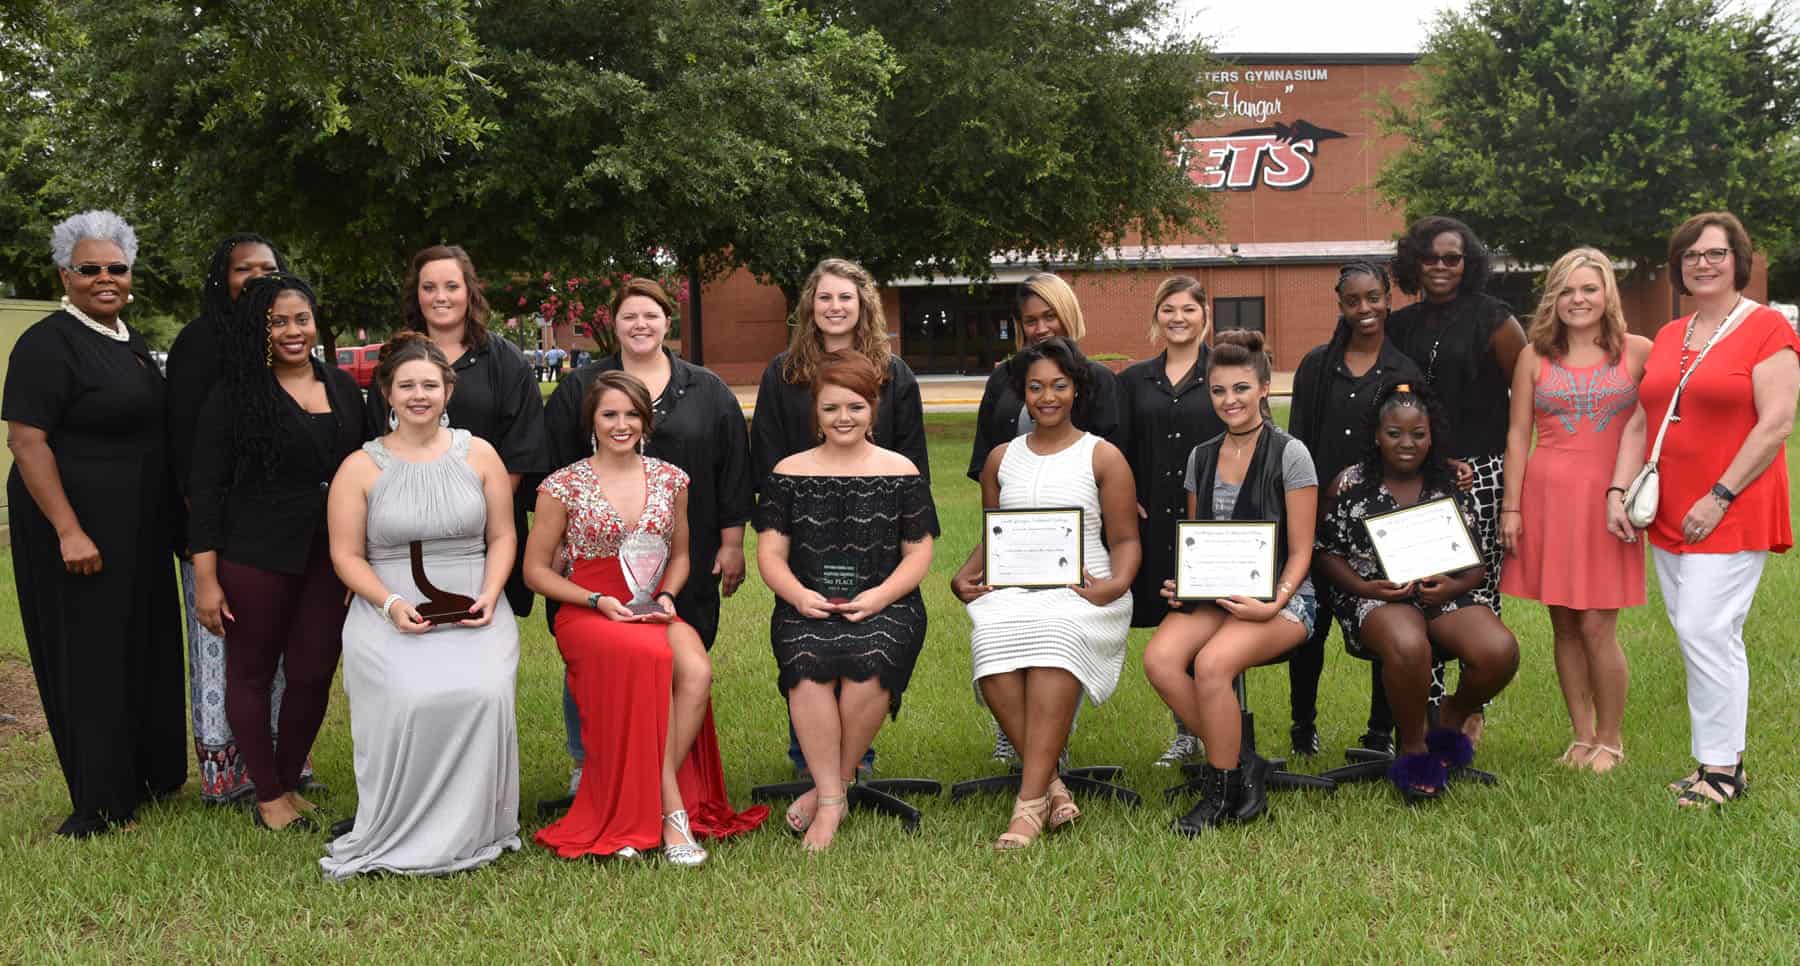 Shown above are the South Georgia Technical College Instructors and winners from the Cosmetology Hairstyling Contest with the judges. They are (standing l to r): SGTC Cosmetology Instructors Dorothea Lusanne McKenzie and Airel Rolle and Instructor trainee Jessakeetha Maddox; first place winner Frances Gill, second place finisher Morgan Whaley, the third place winner Tatum Brown, fourth place contestant Ambrea Hill, Jenna Gill who finished in fifth place, and Jamirah Johnson, the sixth place winner. Also shown are judges Patricia McClary Harris, Audrey Pacetti Wellons and Laura Faircloth. Shown seated (l to r) are the models: Savannah Gill, Ella Hawkins, Kambry Curles, Trenidee Sanford, Trinity Jenkins and Carlexia Wiggins.